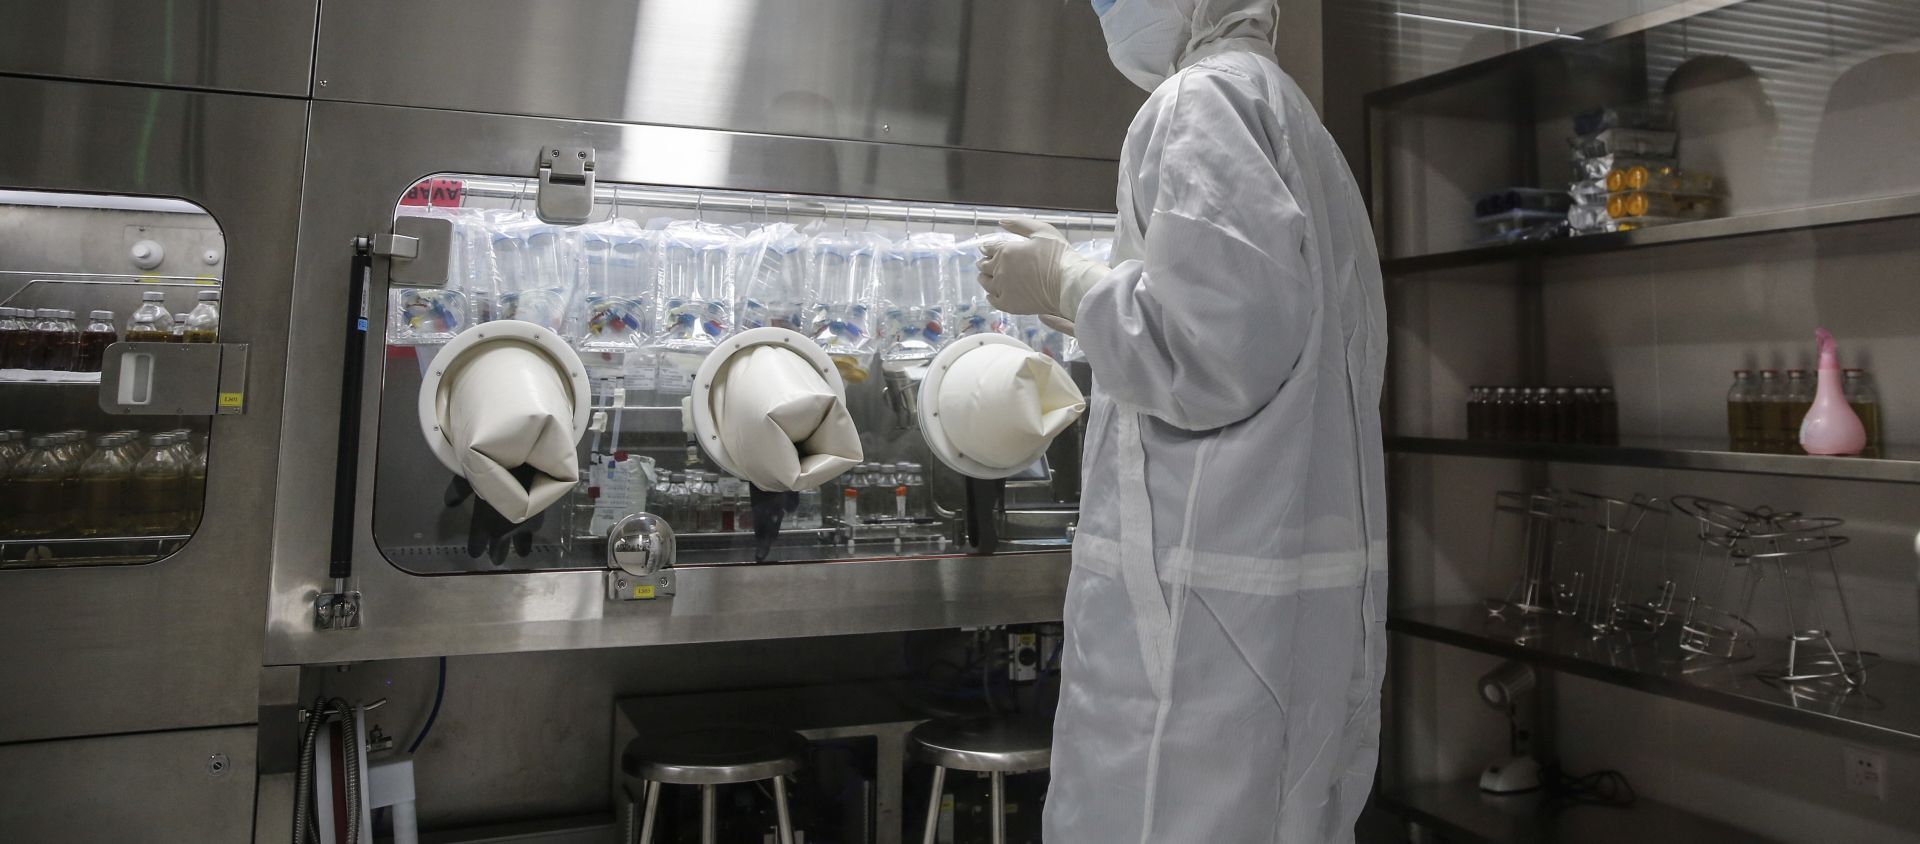 epa08693050 An employee works at the facility of Sinovac Biotech during a government-organized media visiting in Beijing, China, 24 September 2020. Sinovac is a Chinese vaccine maker that is developing the COVID-19 vaccine candidate called CoronaVac.  EPA/WU HONG